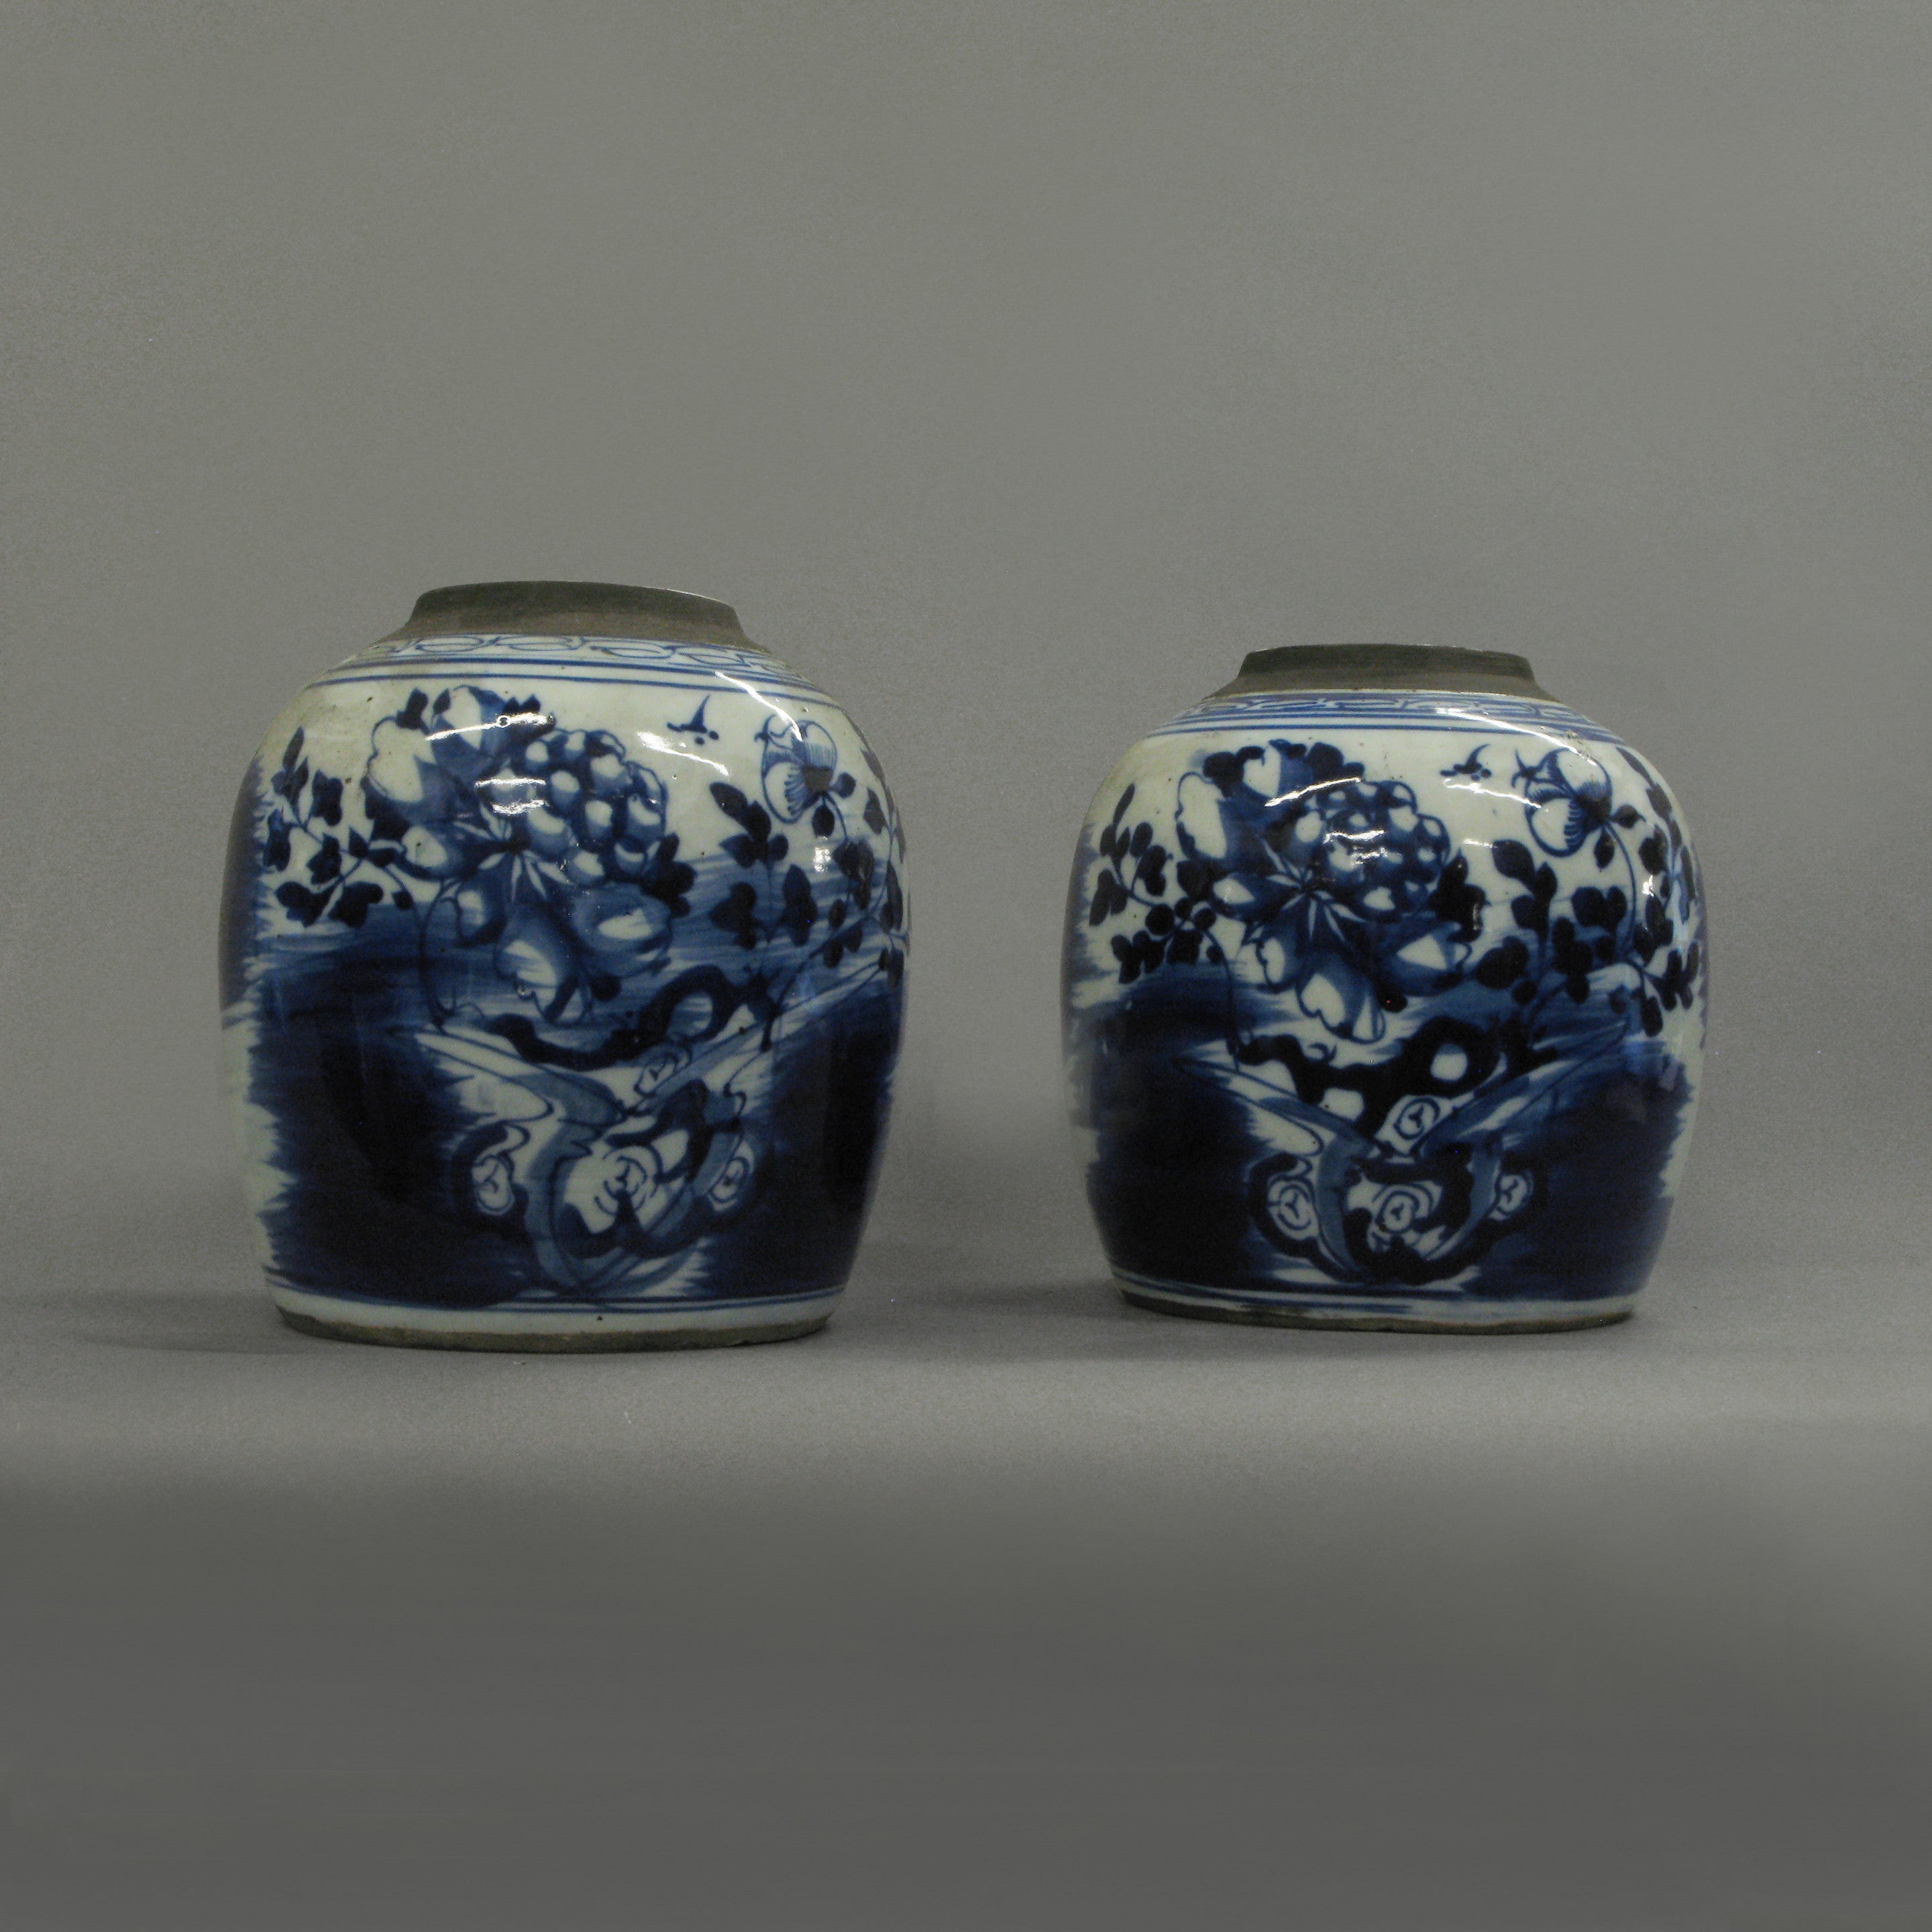 A Pair of 19th Century Blue & White Porcelain Ginger Jars